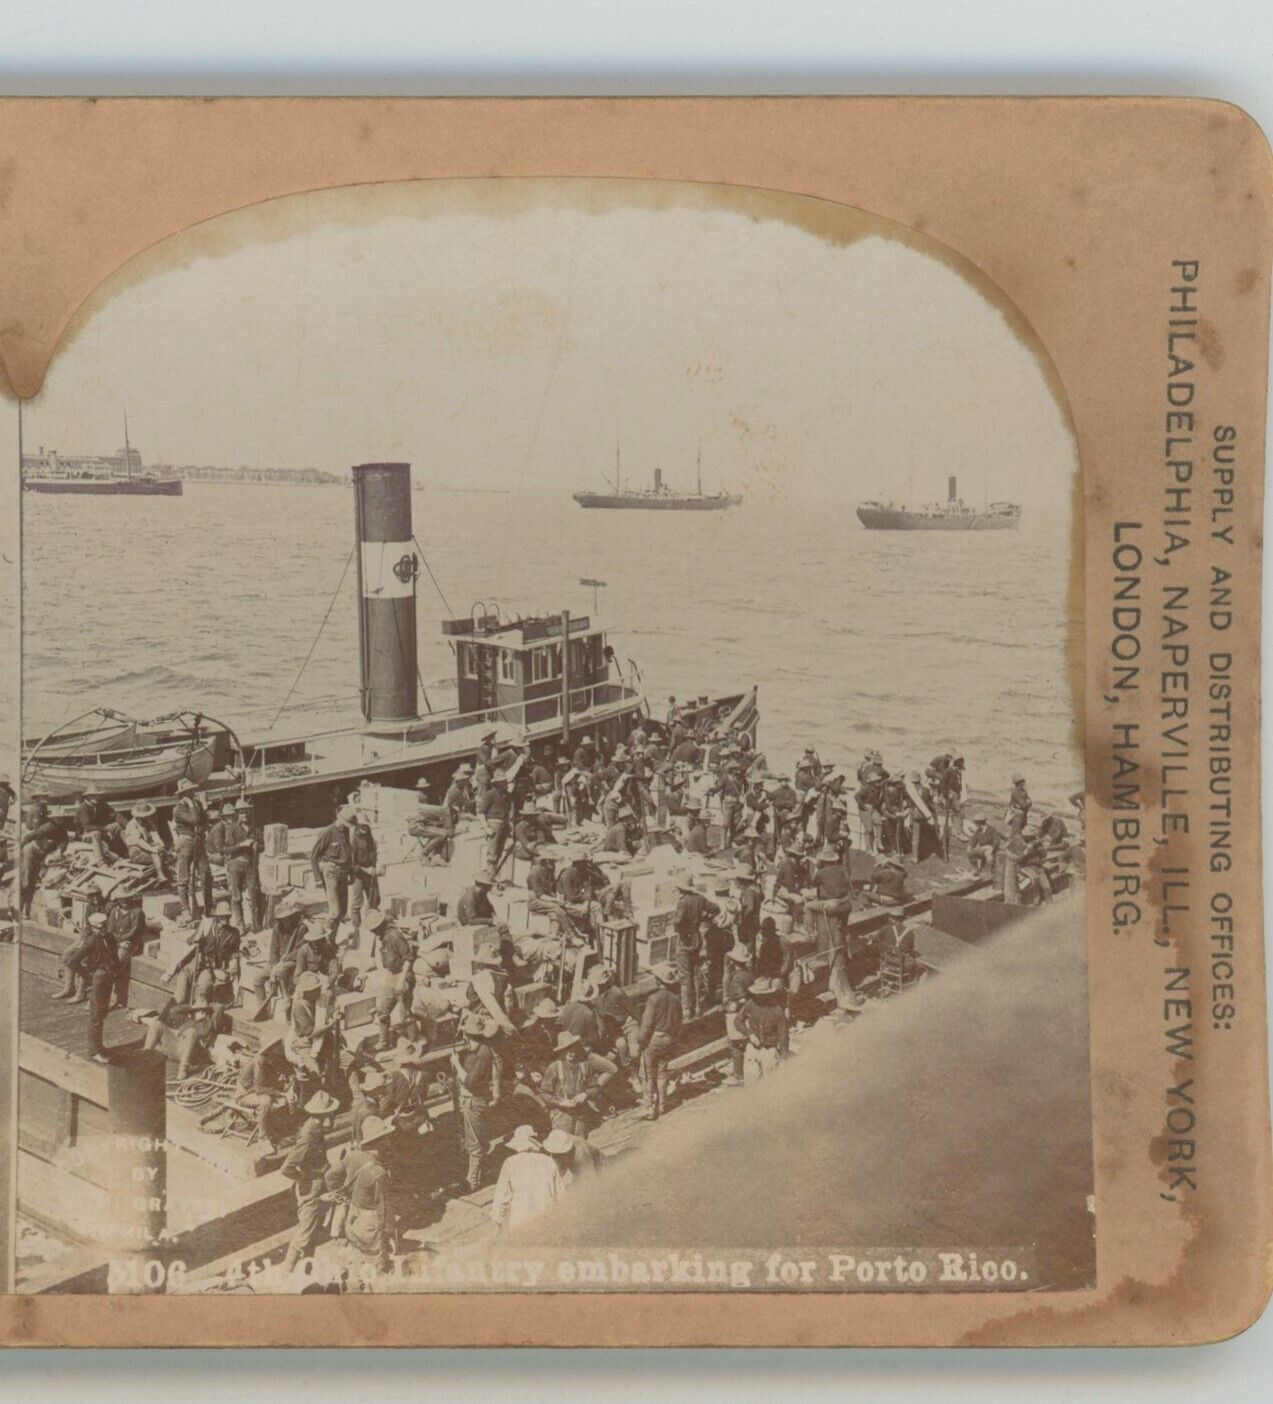 Infantry embarking for Porto Rico Stereoview